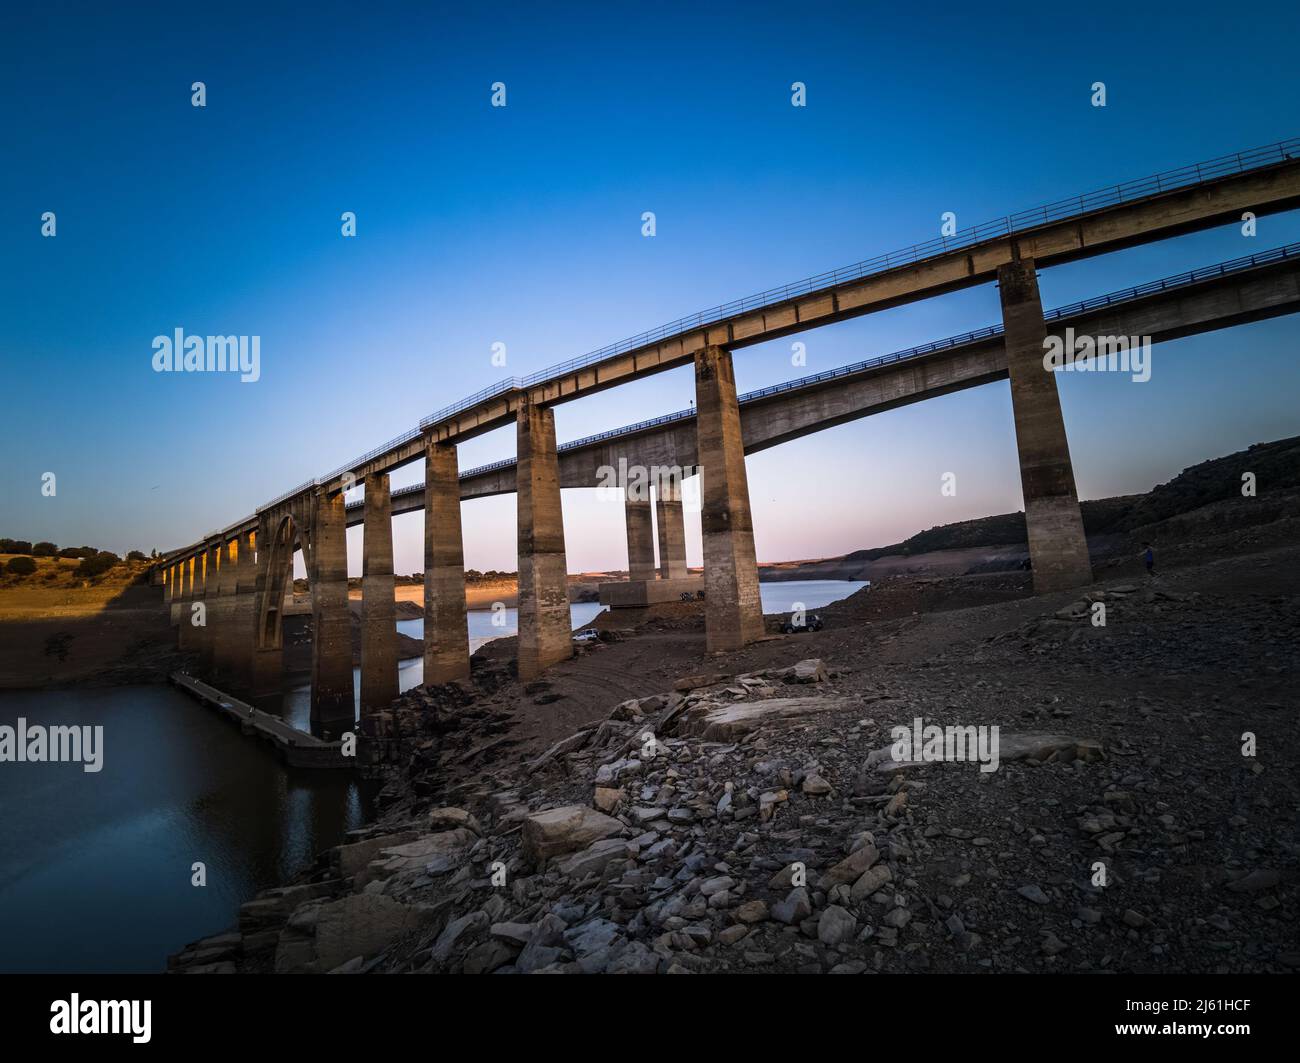 Huge drought with bridges on different levels, wide view Stock Photo